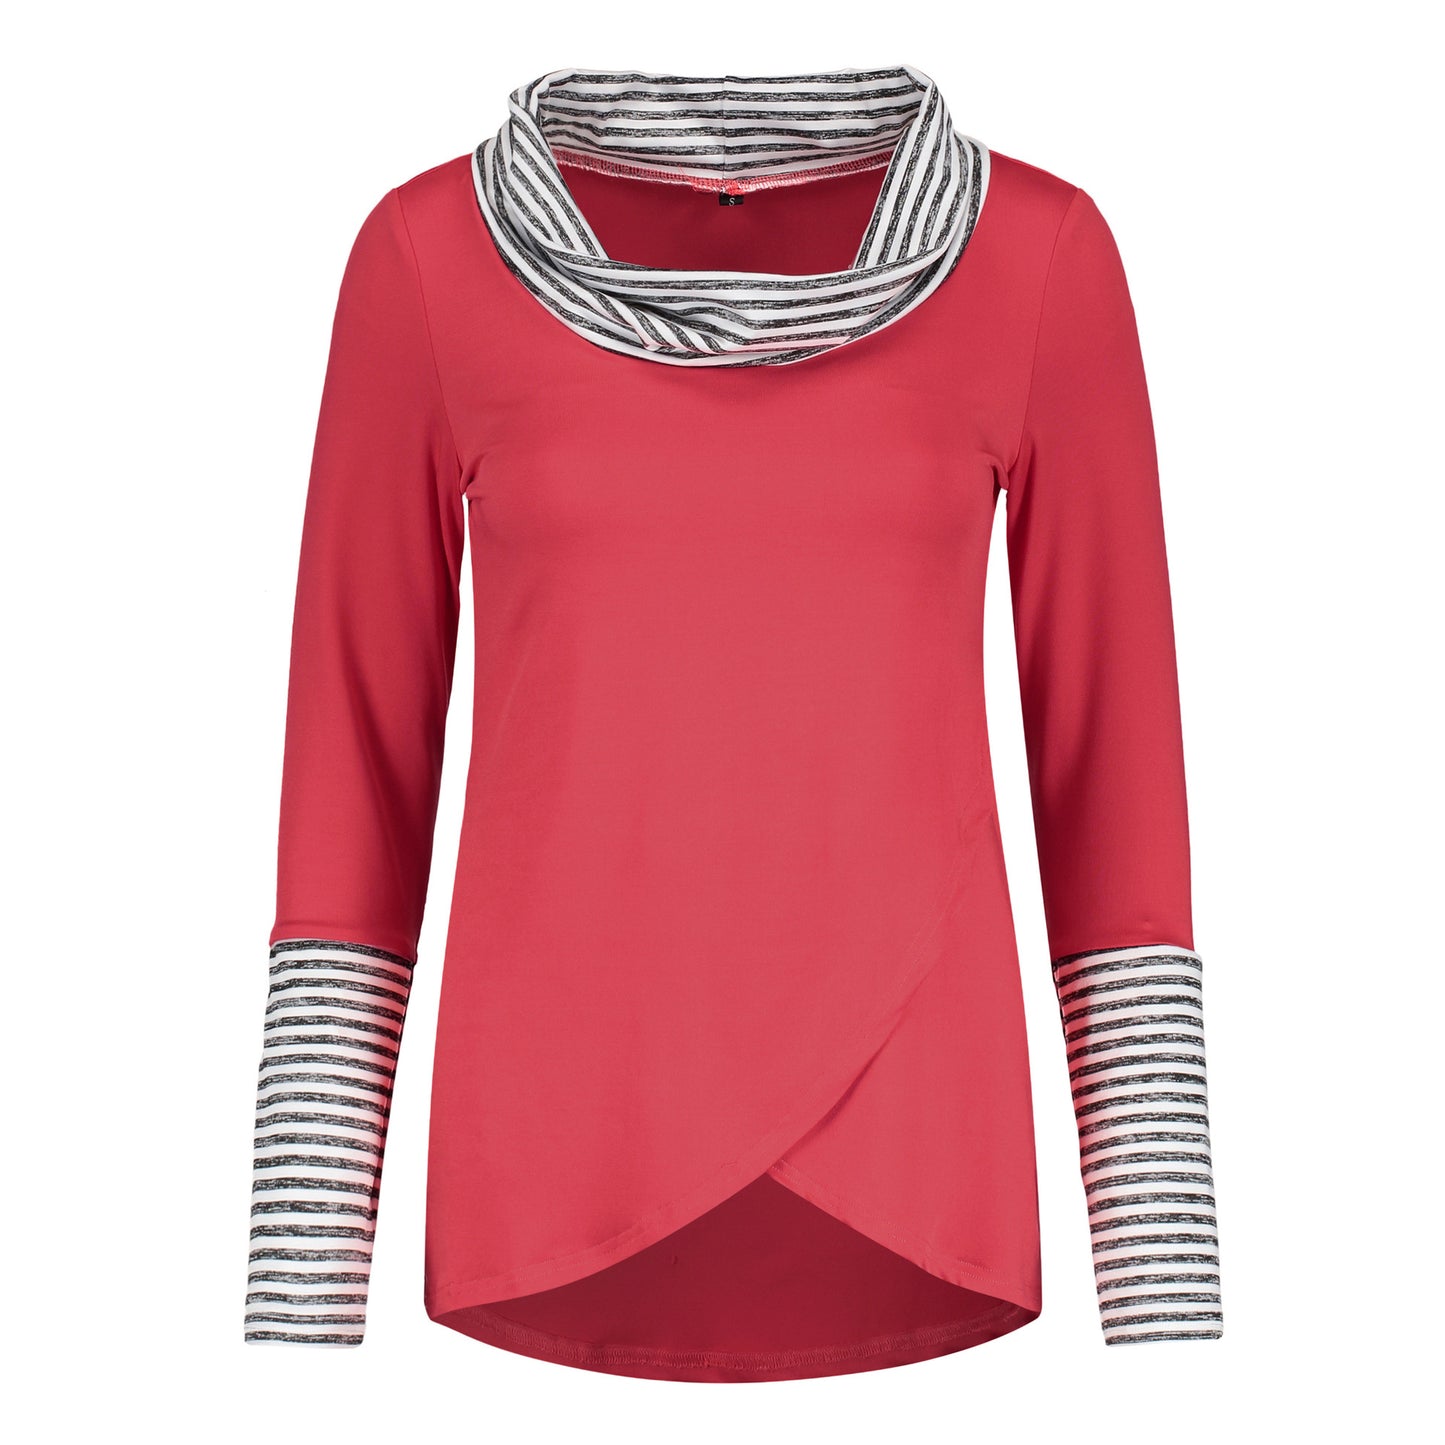 Striped Turtleneck Colorblock Long Sleeve Top - Chic and Stylish Fashion